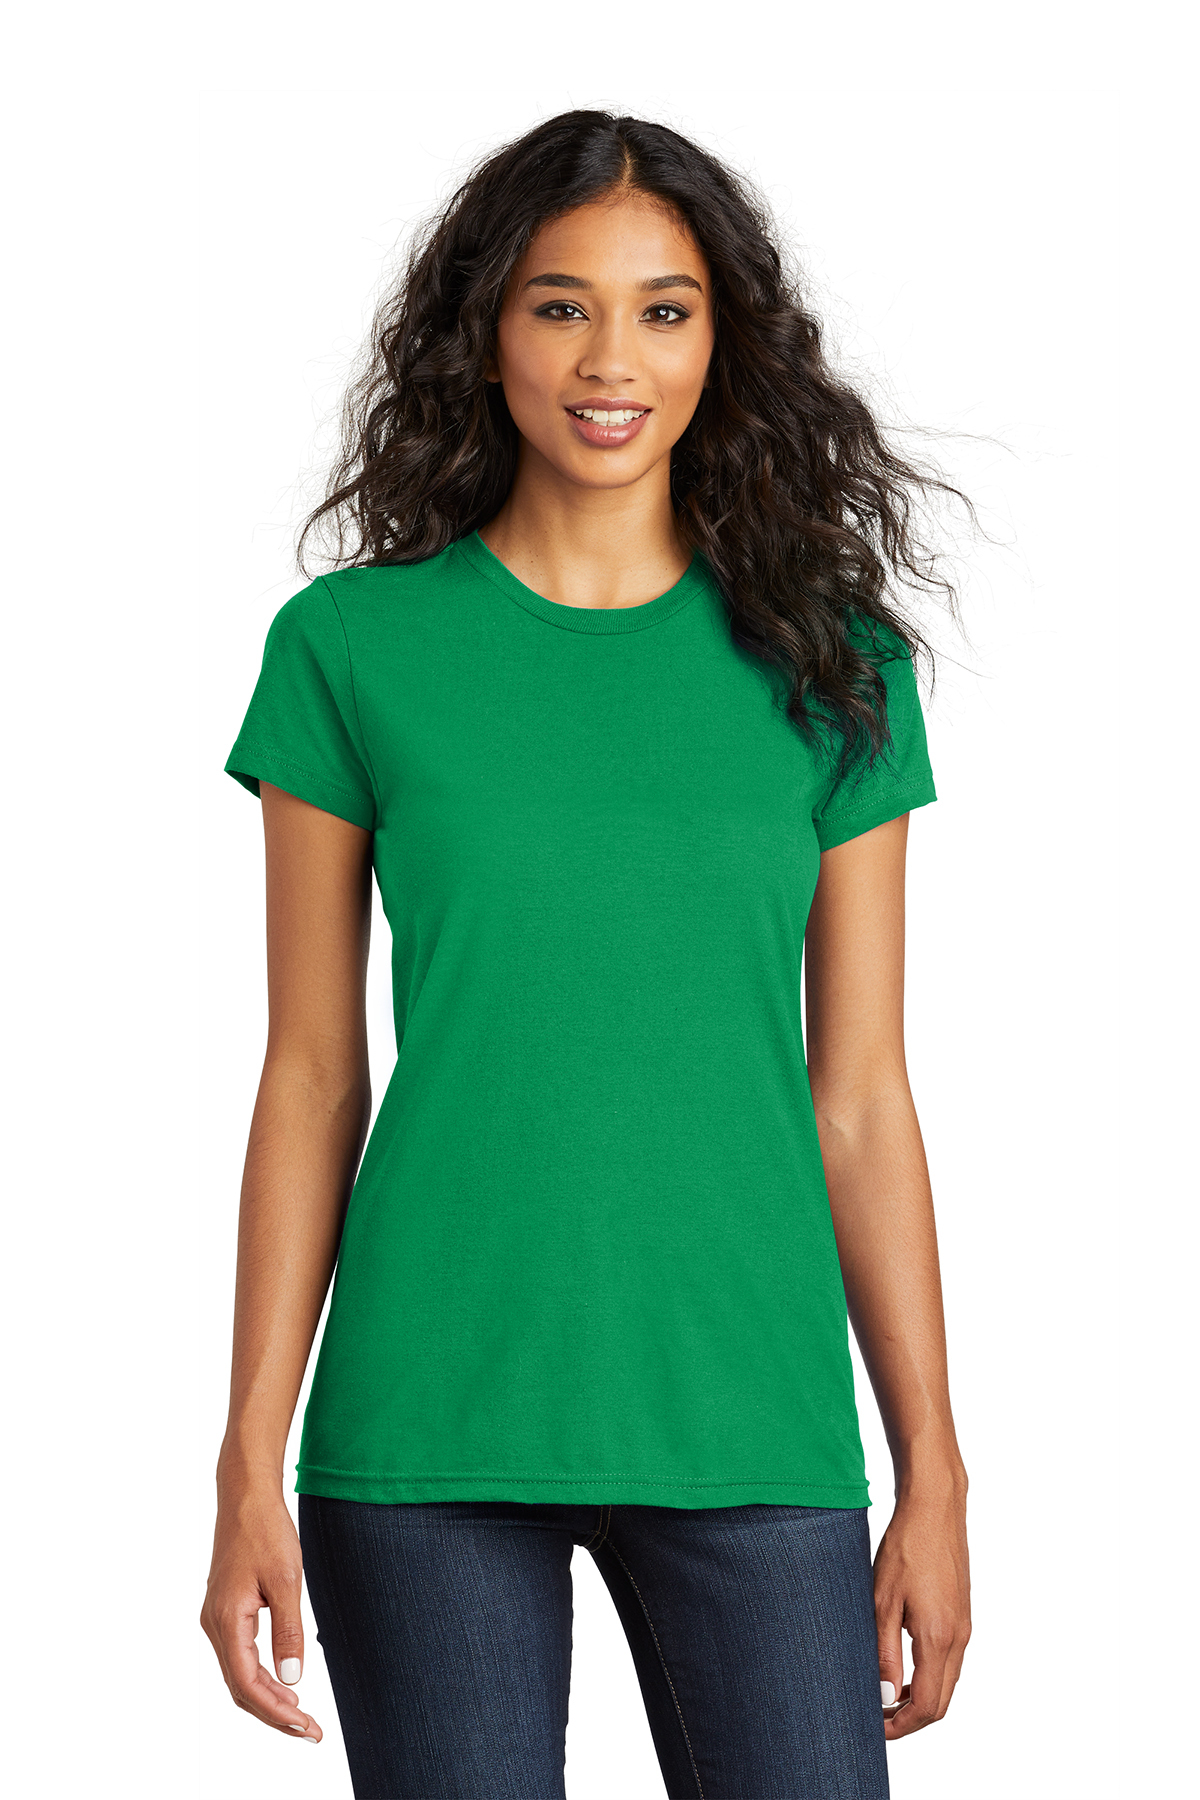 Buy Wacoal Green Under-wired Padded T-Shirt for Women Online @ Tata CLiQ